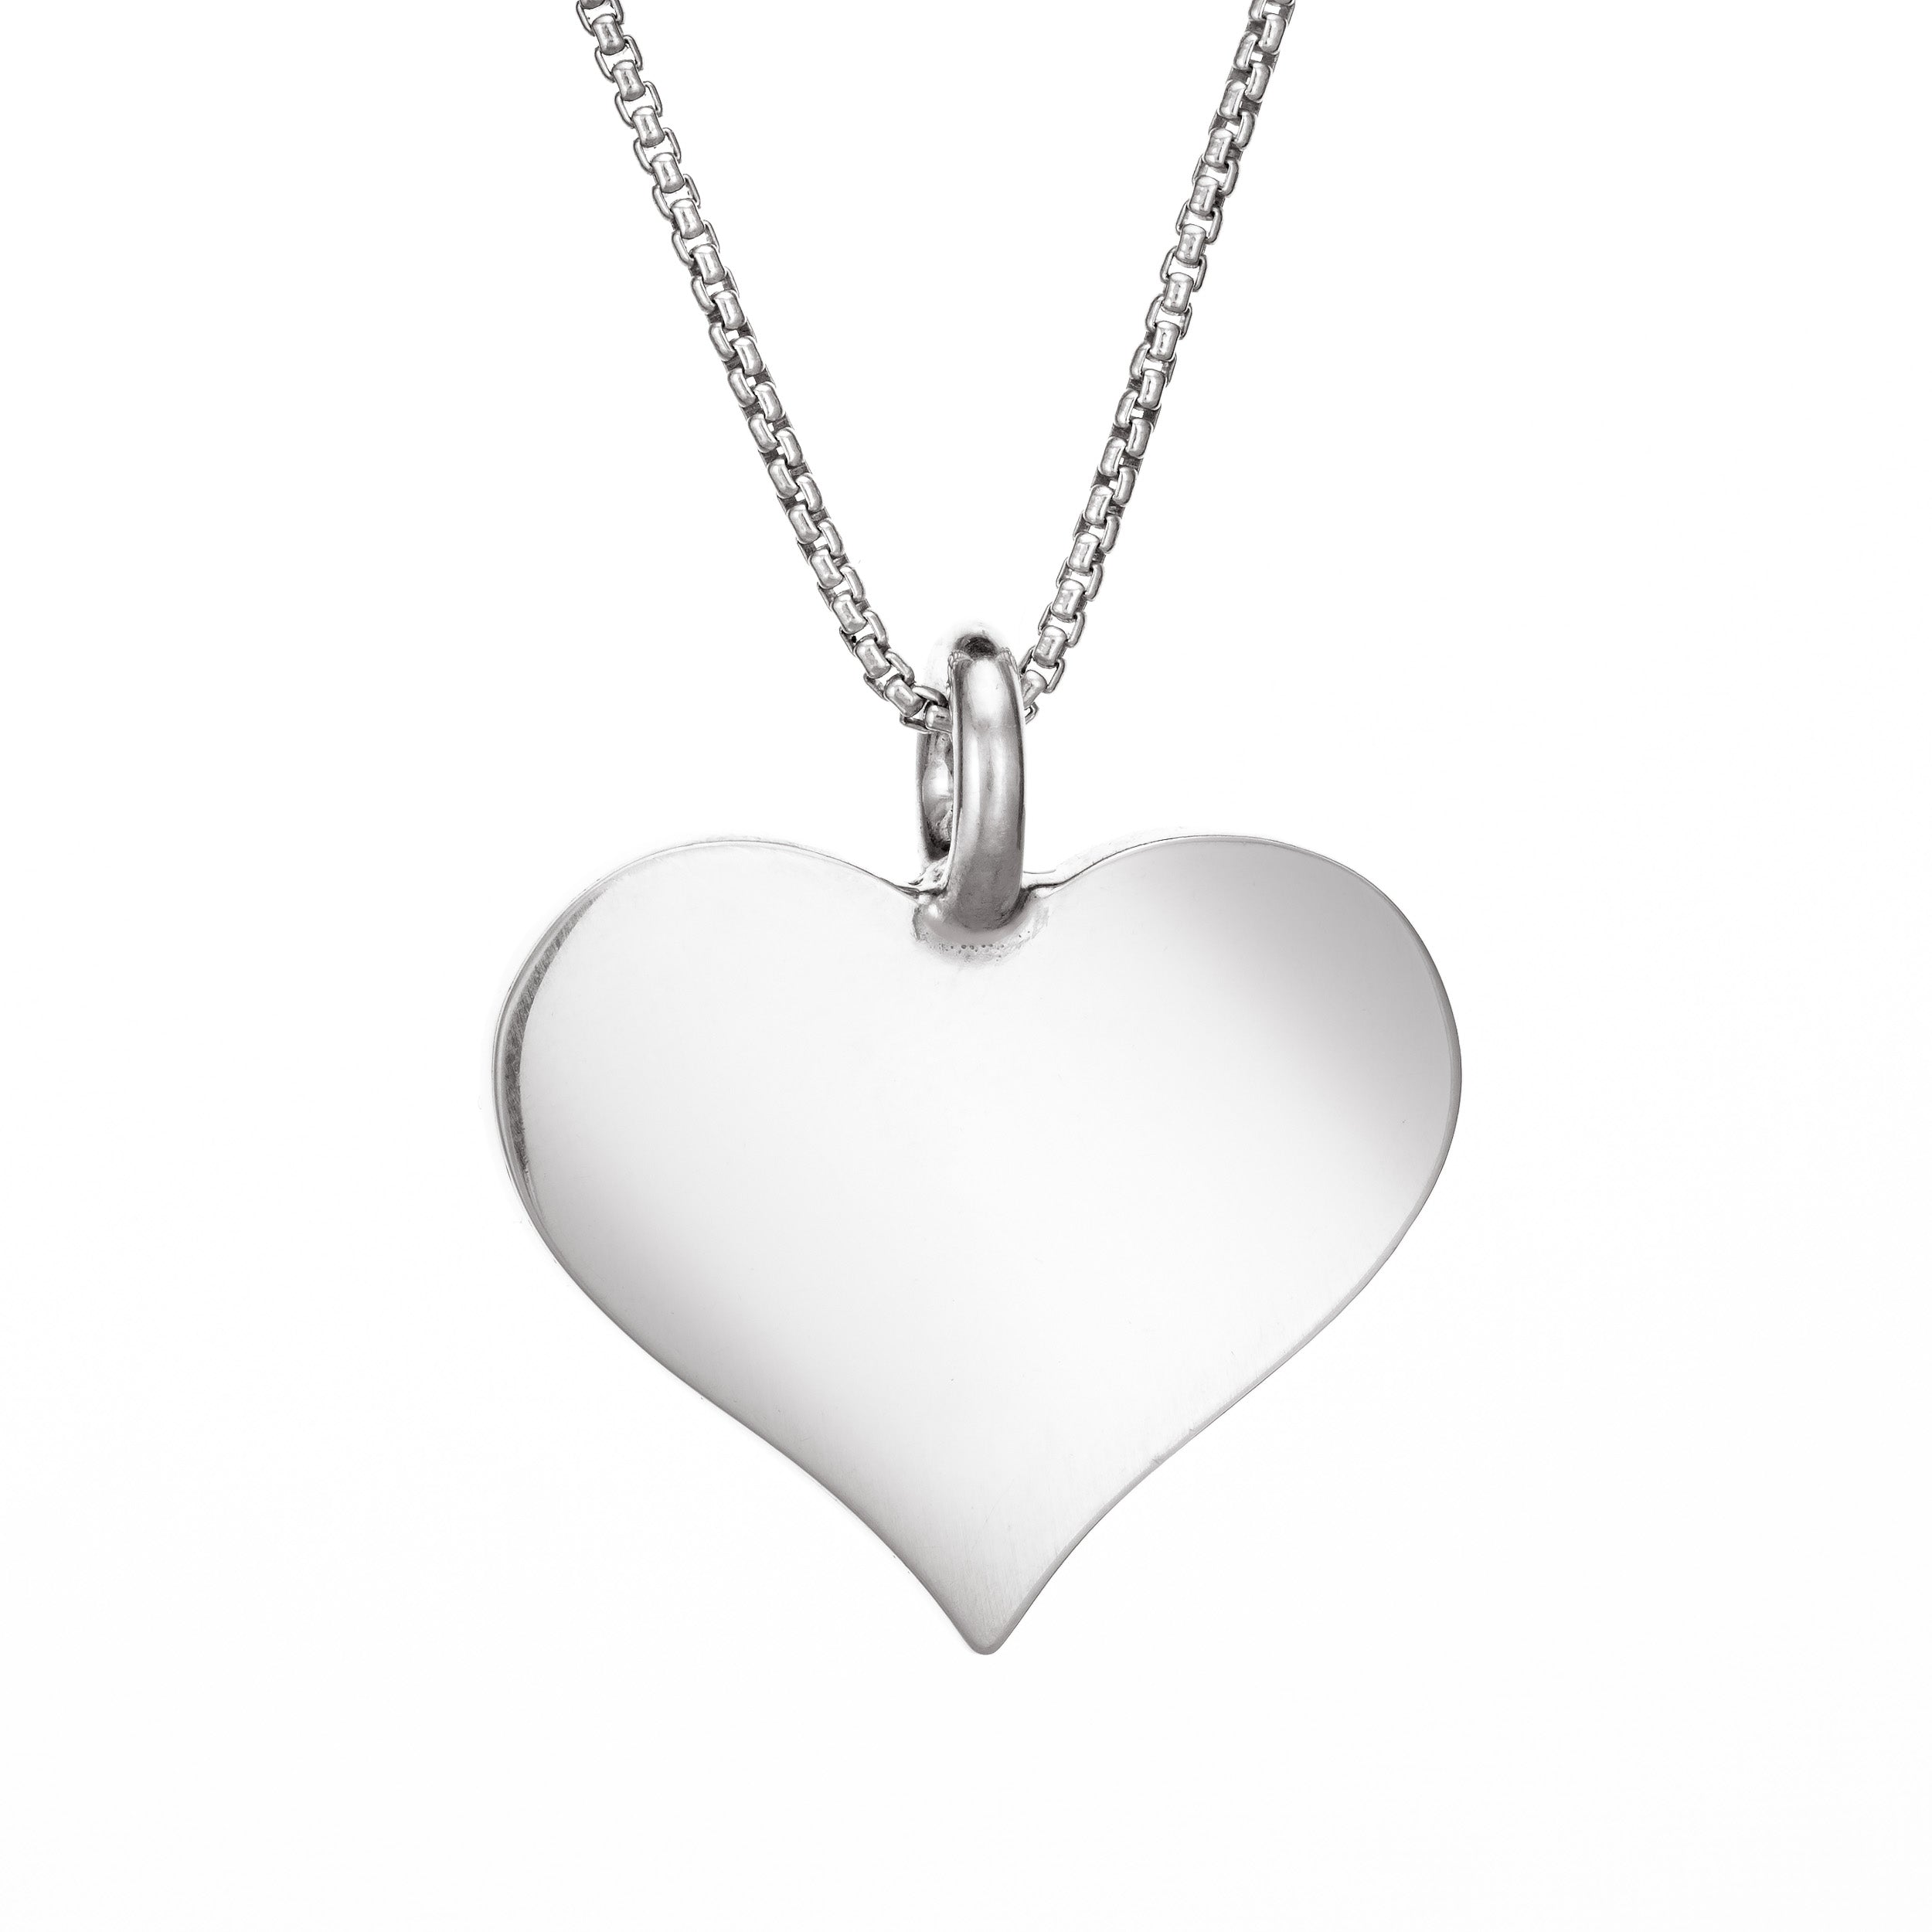 Big Love Heart Pendant and Chain Necklace in Gold | Uncommon James